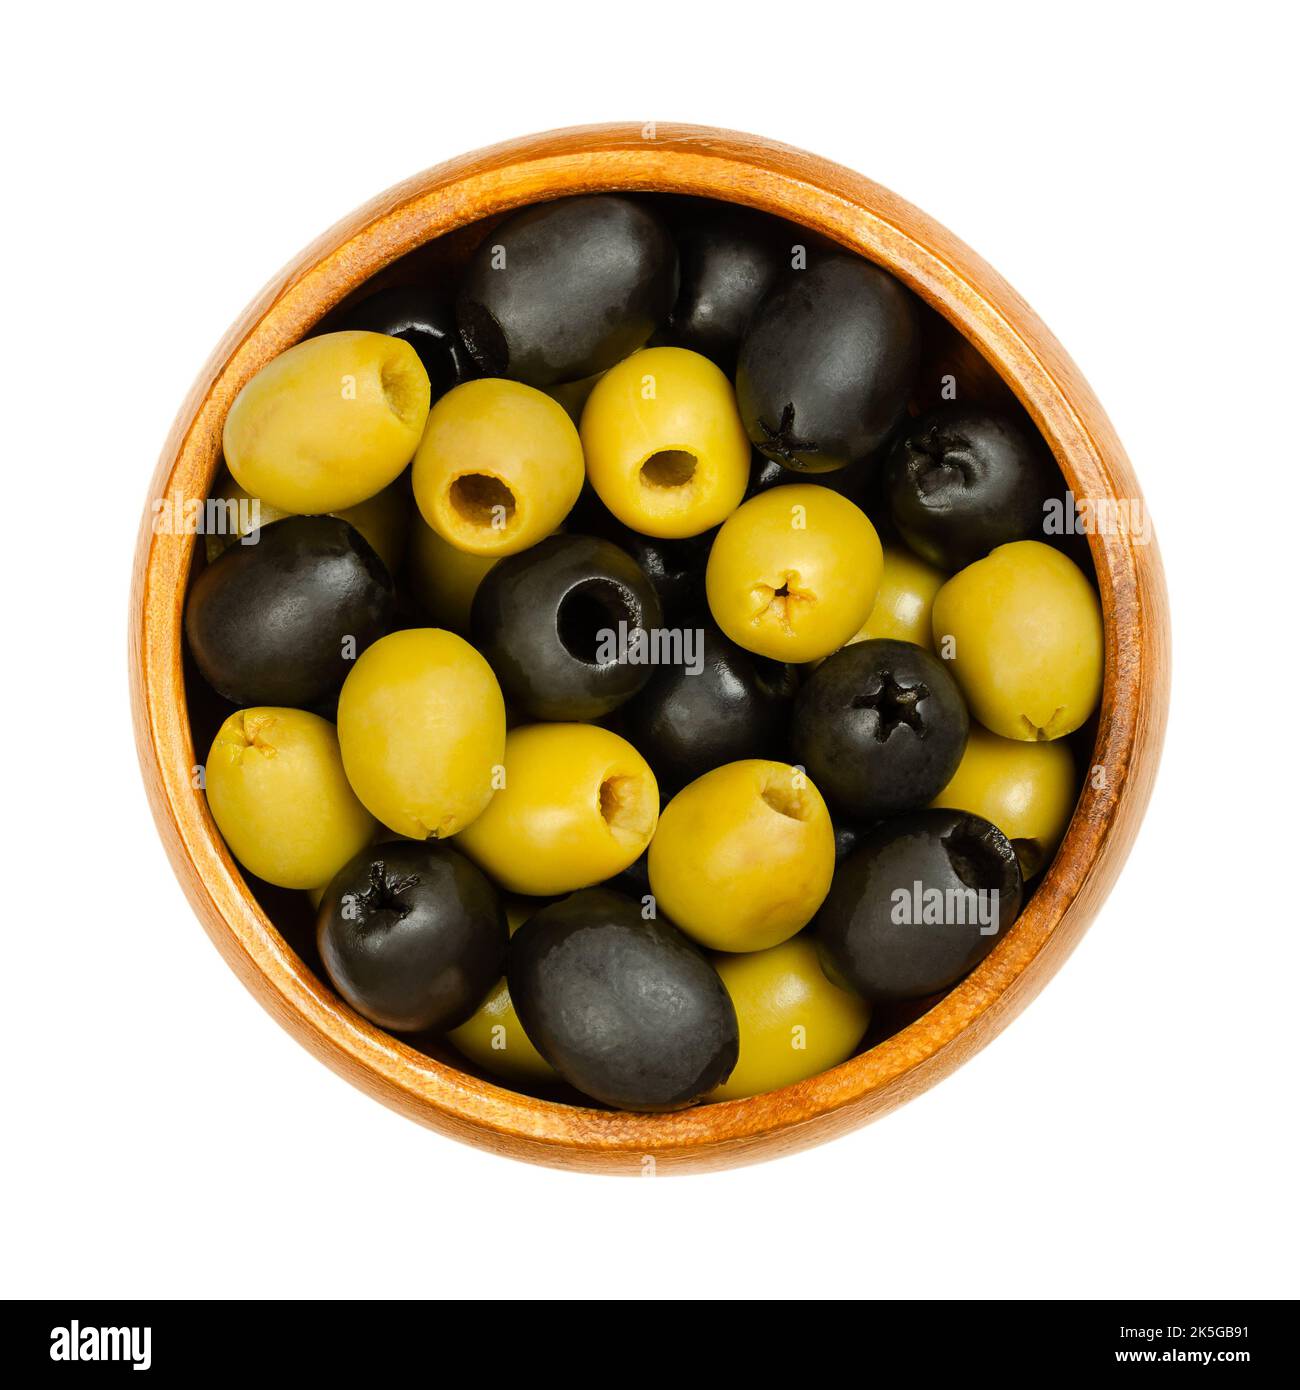 Pitted green and black olives, Hojiblanca, in a wooden bowl. European olives, Olea europaea. Popular table olives with a lower oil content. Stock Photo